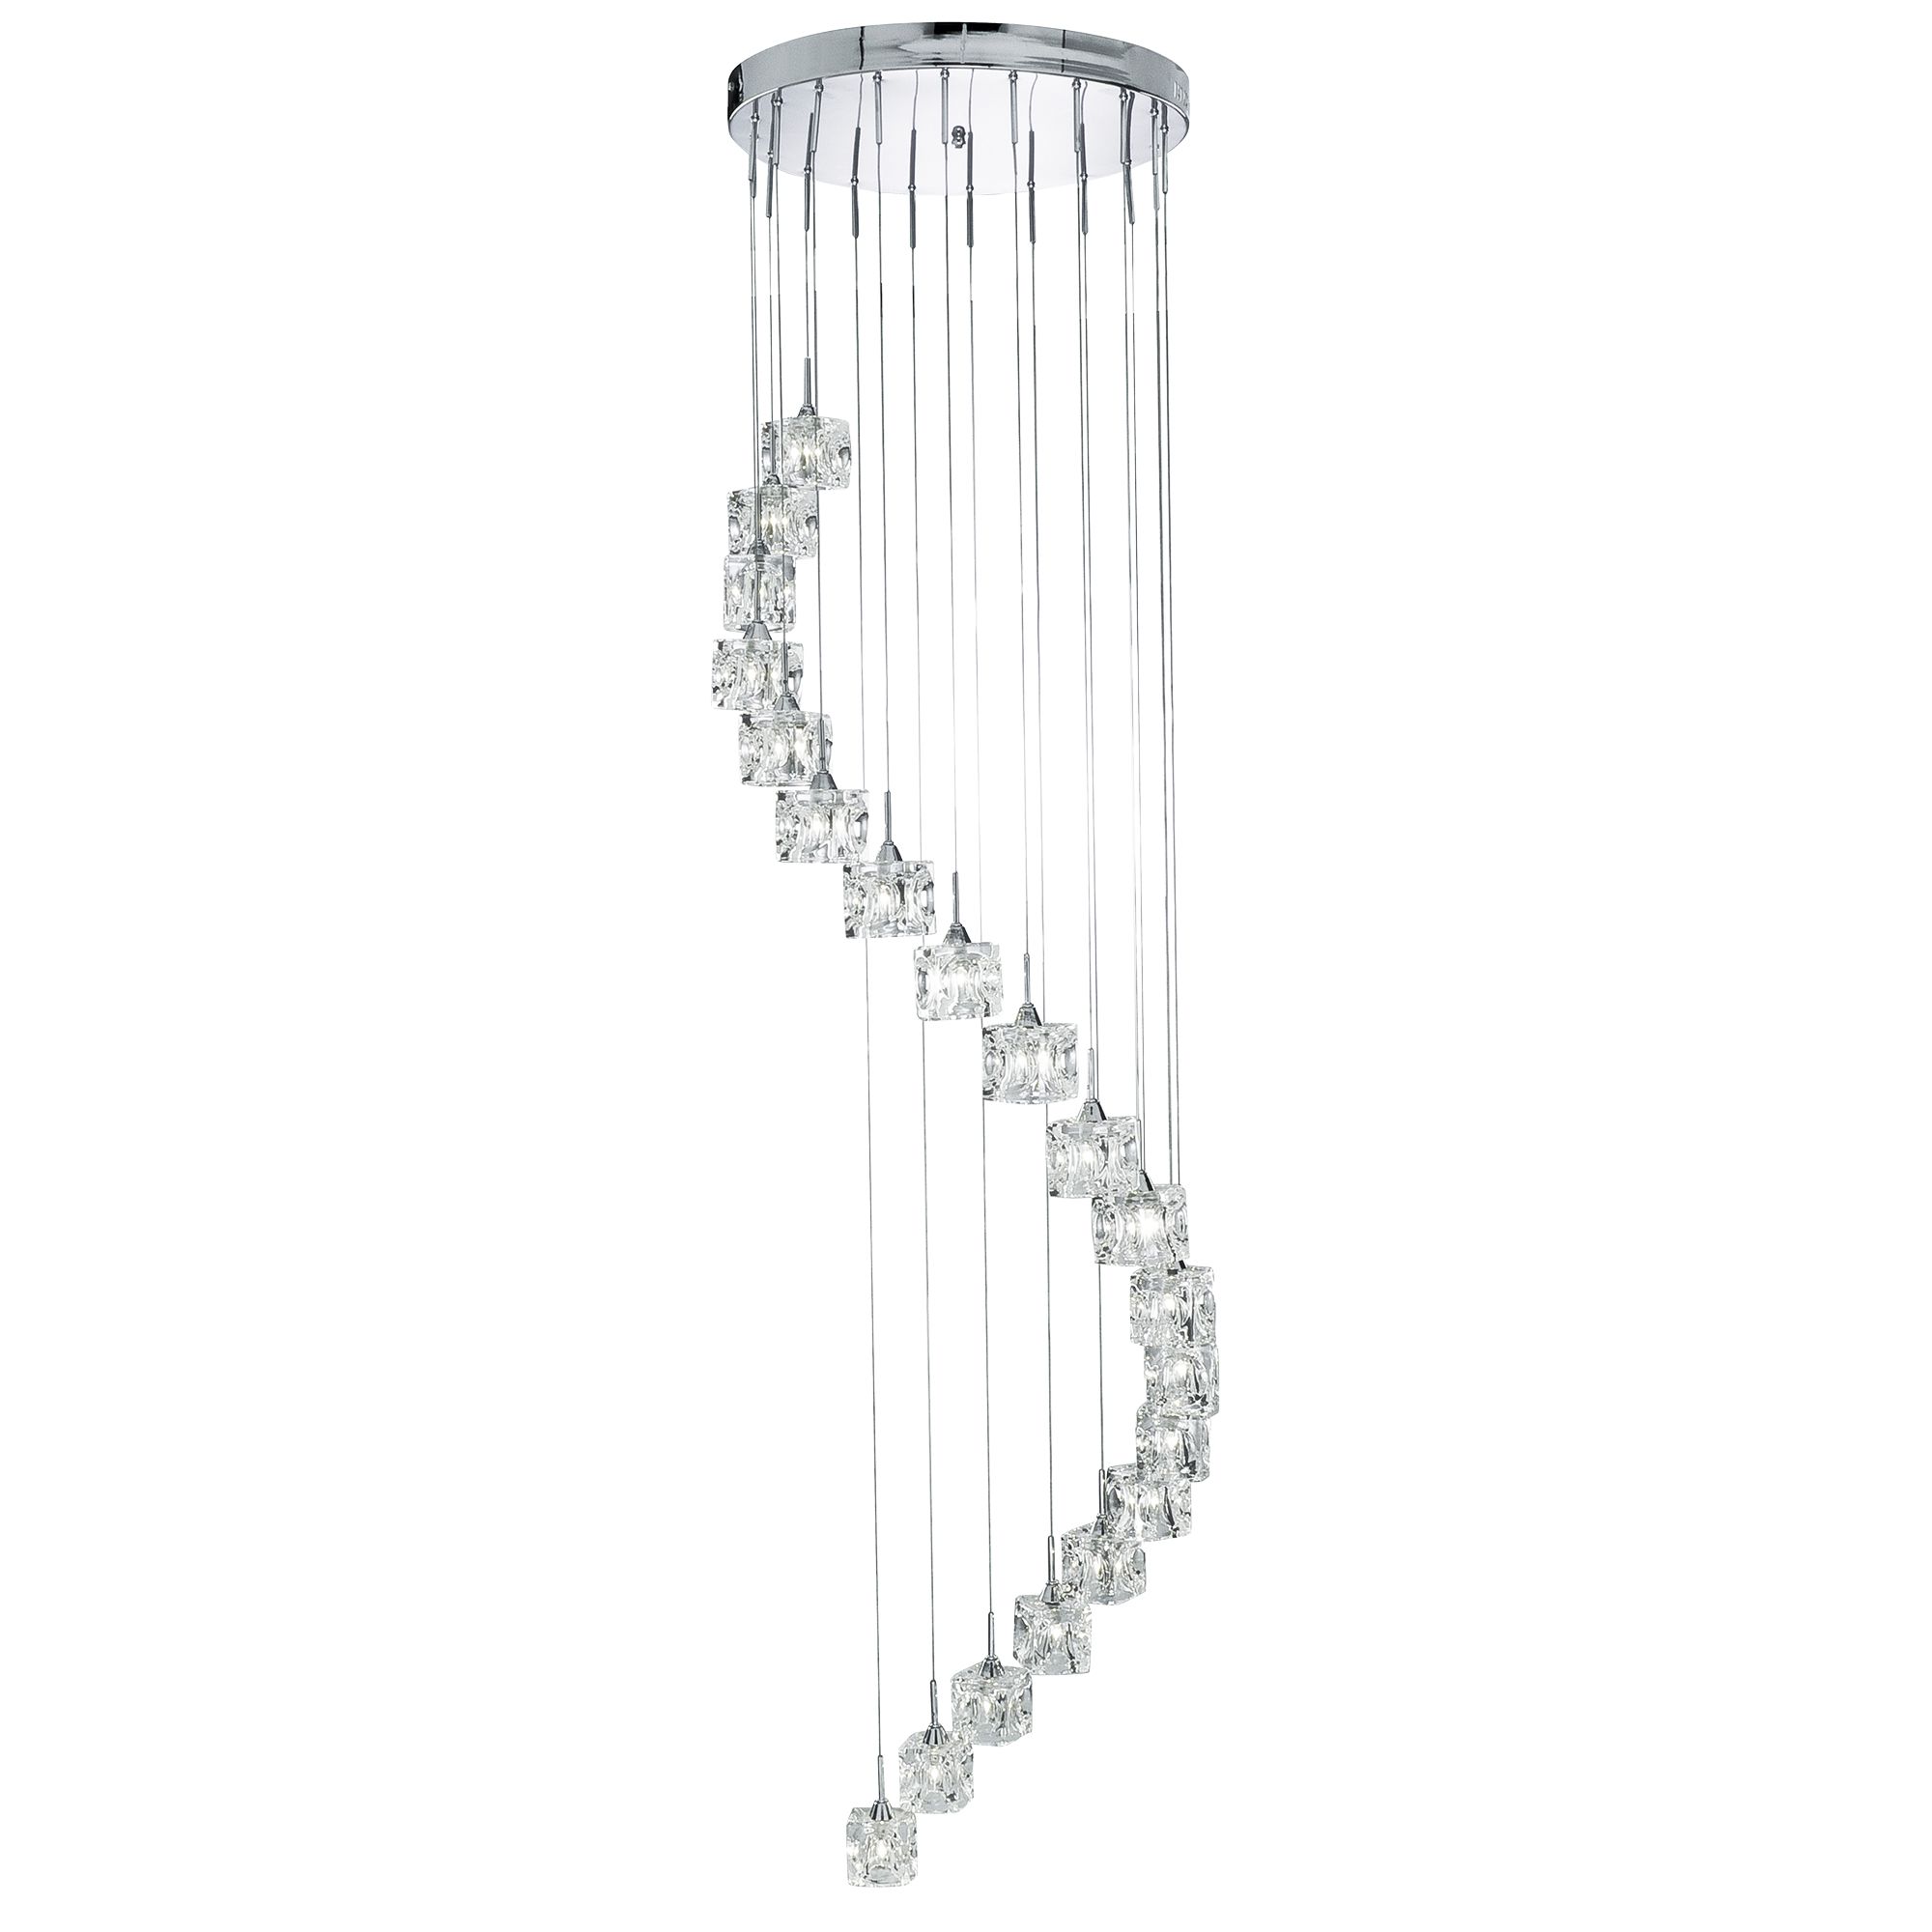 Cascading 20 Light LED Ice Cube Multi-Drop Ceiling Fitting